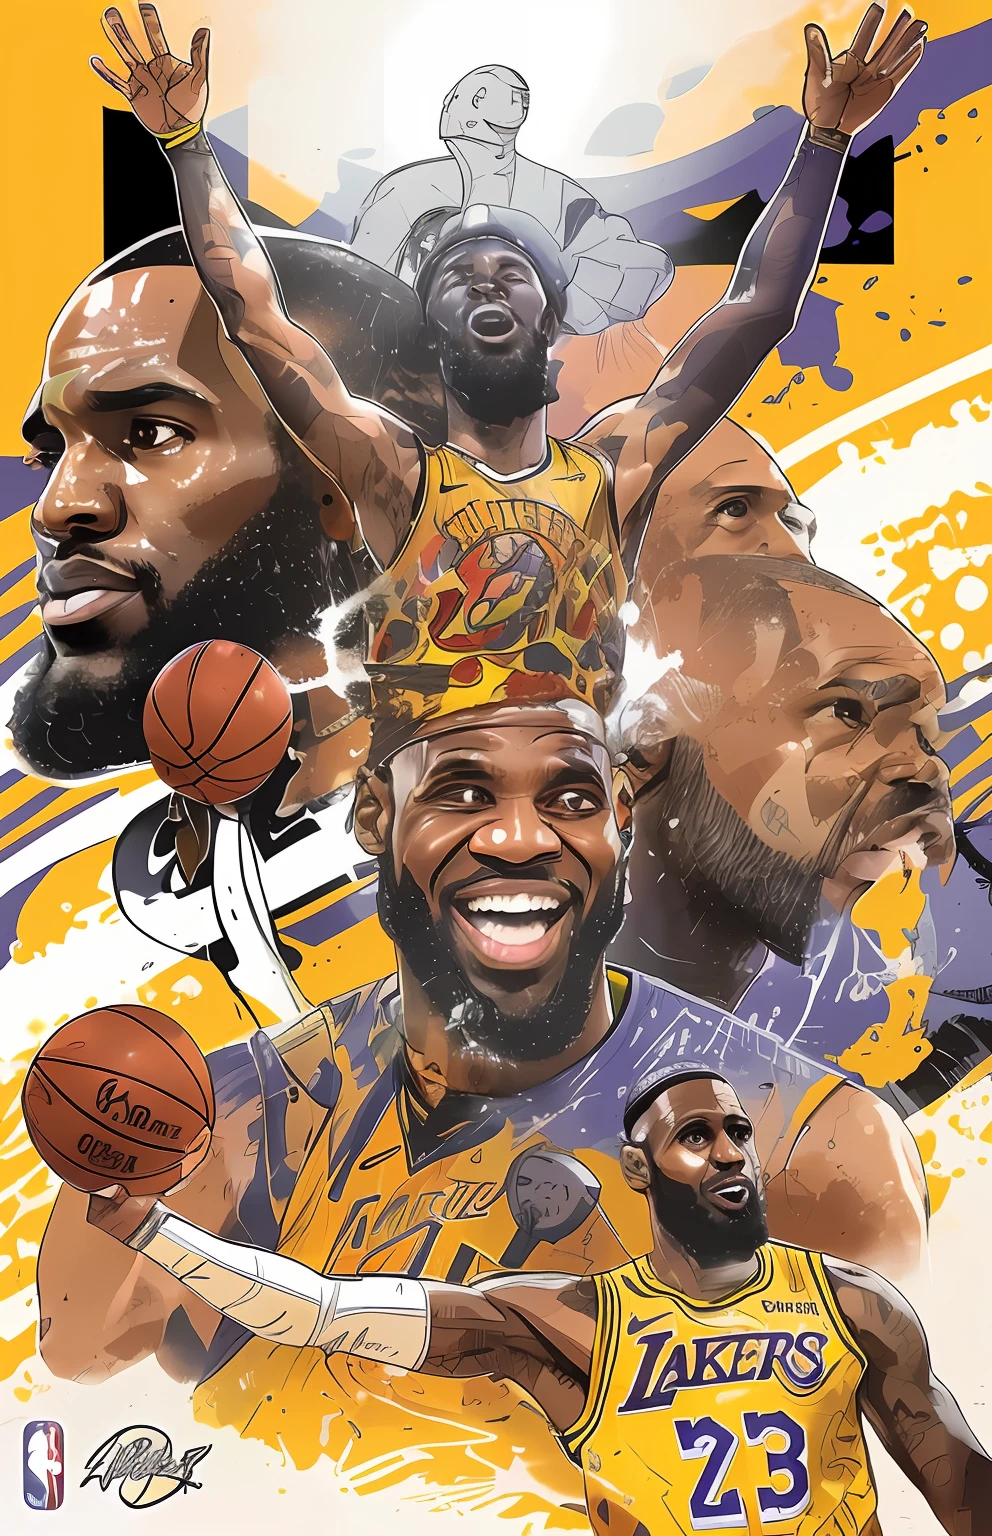 "An illustration depicting a basketball player wearing a crown on his head，Portrait of LeBron James，Highly detailed fanart，NBA Finals winning illustration，LeBron James art cover illustration，official print，Lakers fan art，Official artwork depicted in detail，hyper detailed illustration，Full art style，A posterized work with a sense of art。"